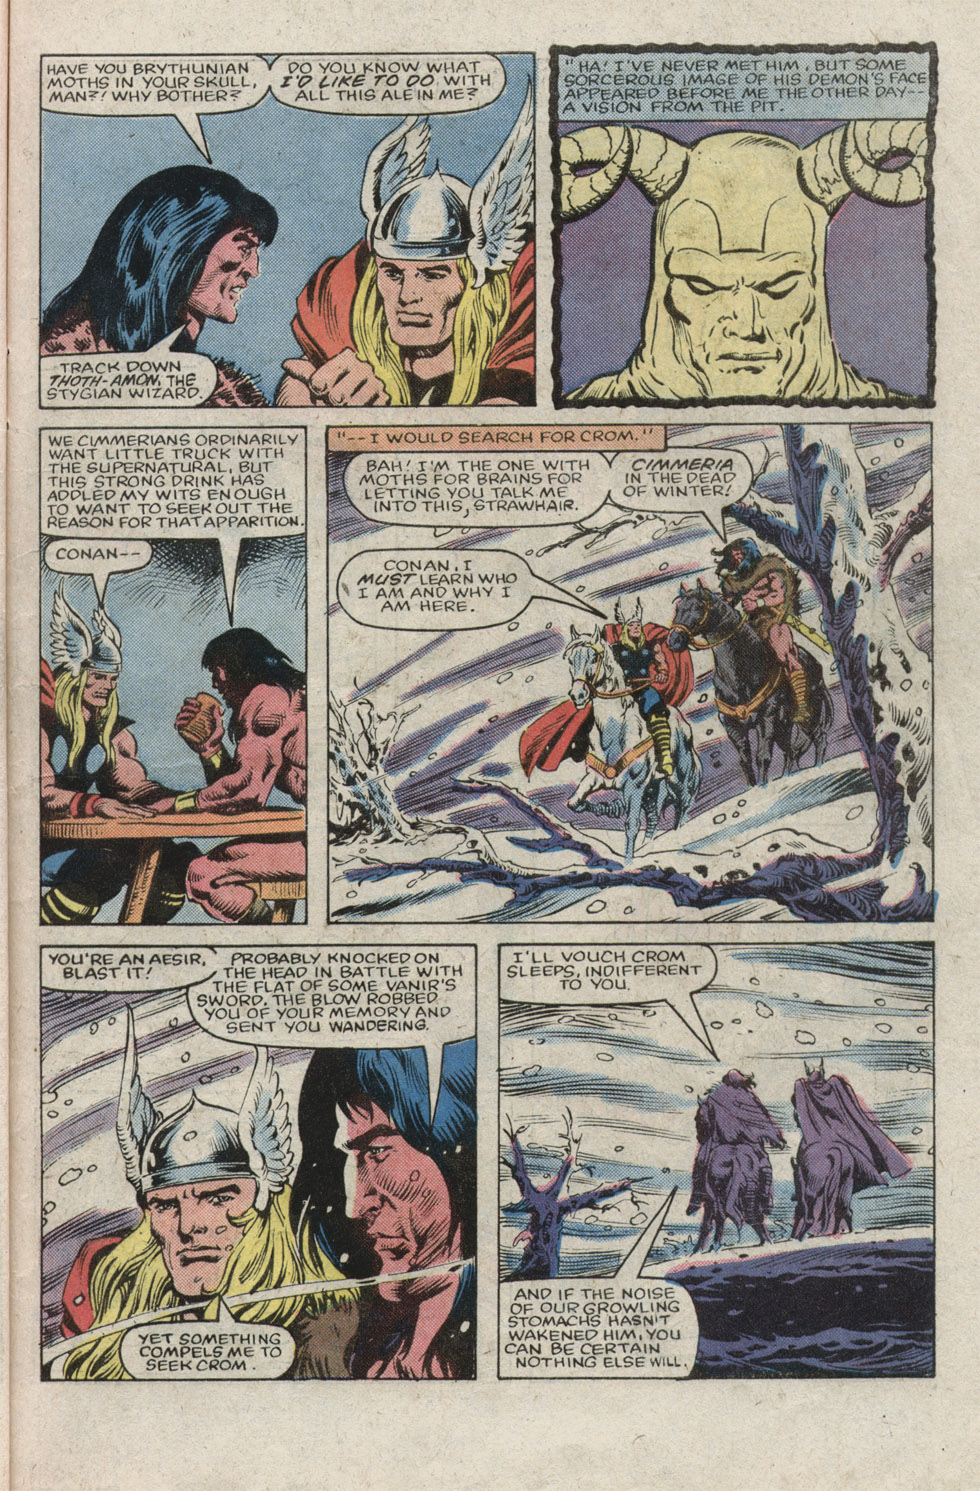 What If? (1977) issue 39 - Thor battled conan - Page 19